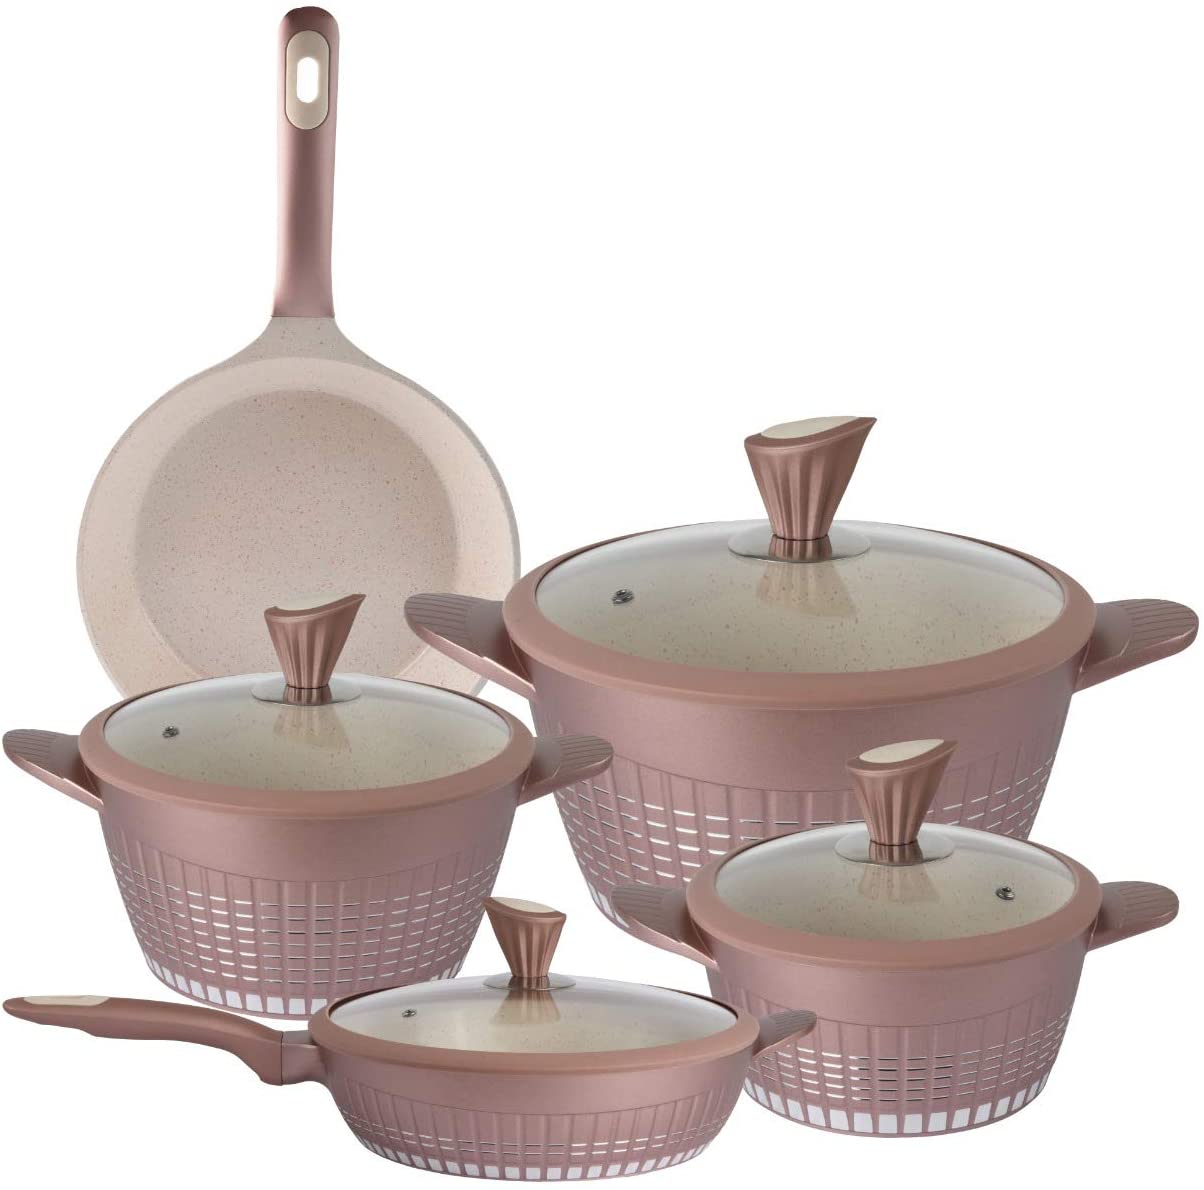 Non-Stick Cookware Set of 9 (pink)